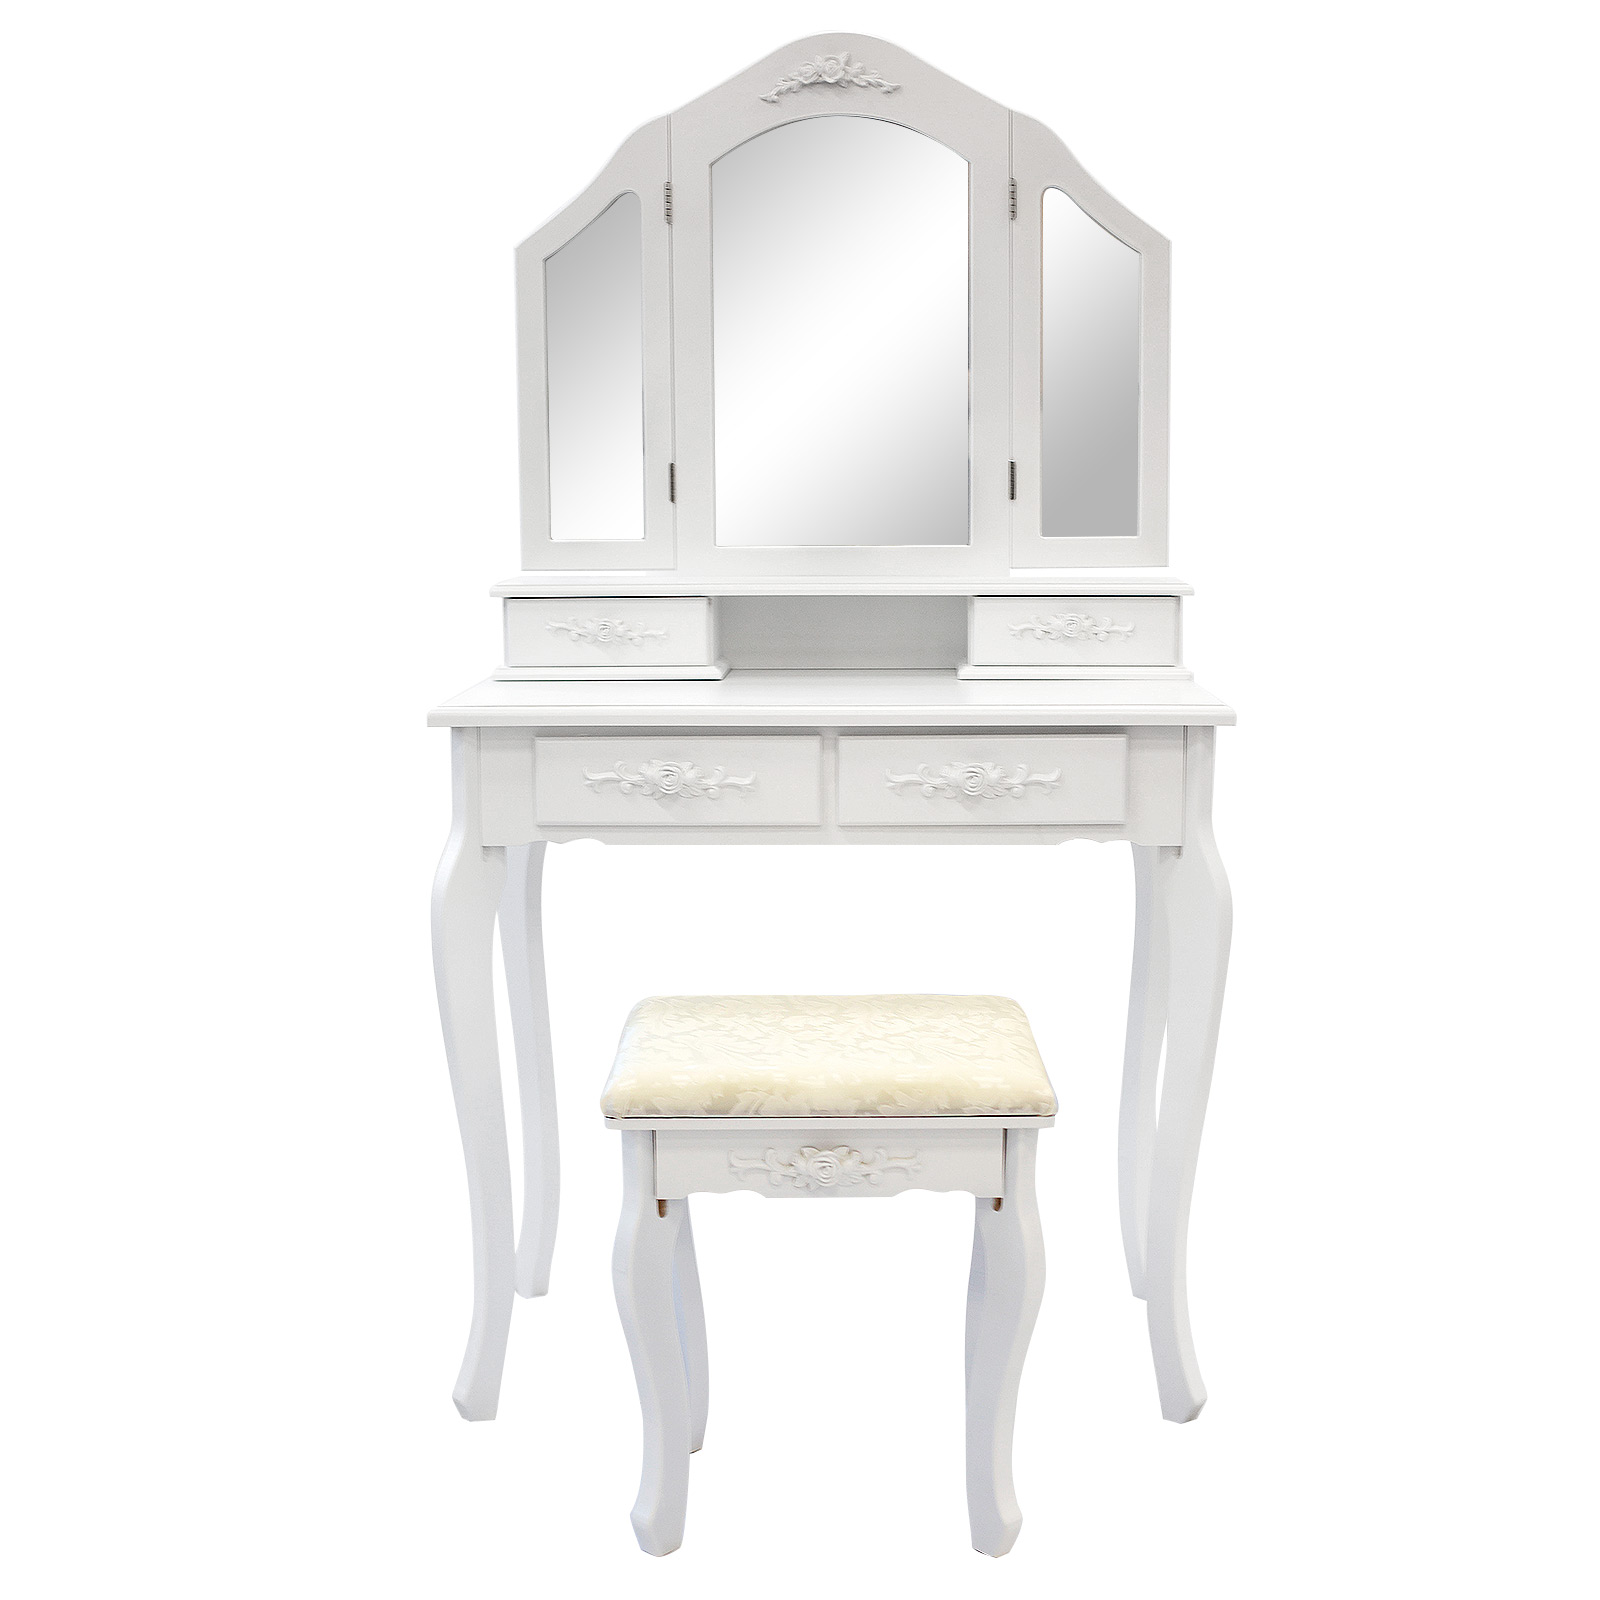 3 Mirrors 4 Drawers Dressing Table - DIANA WHITE